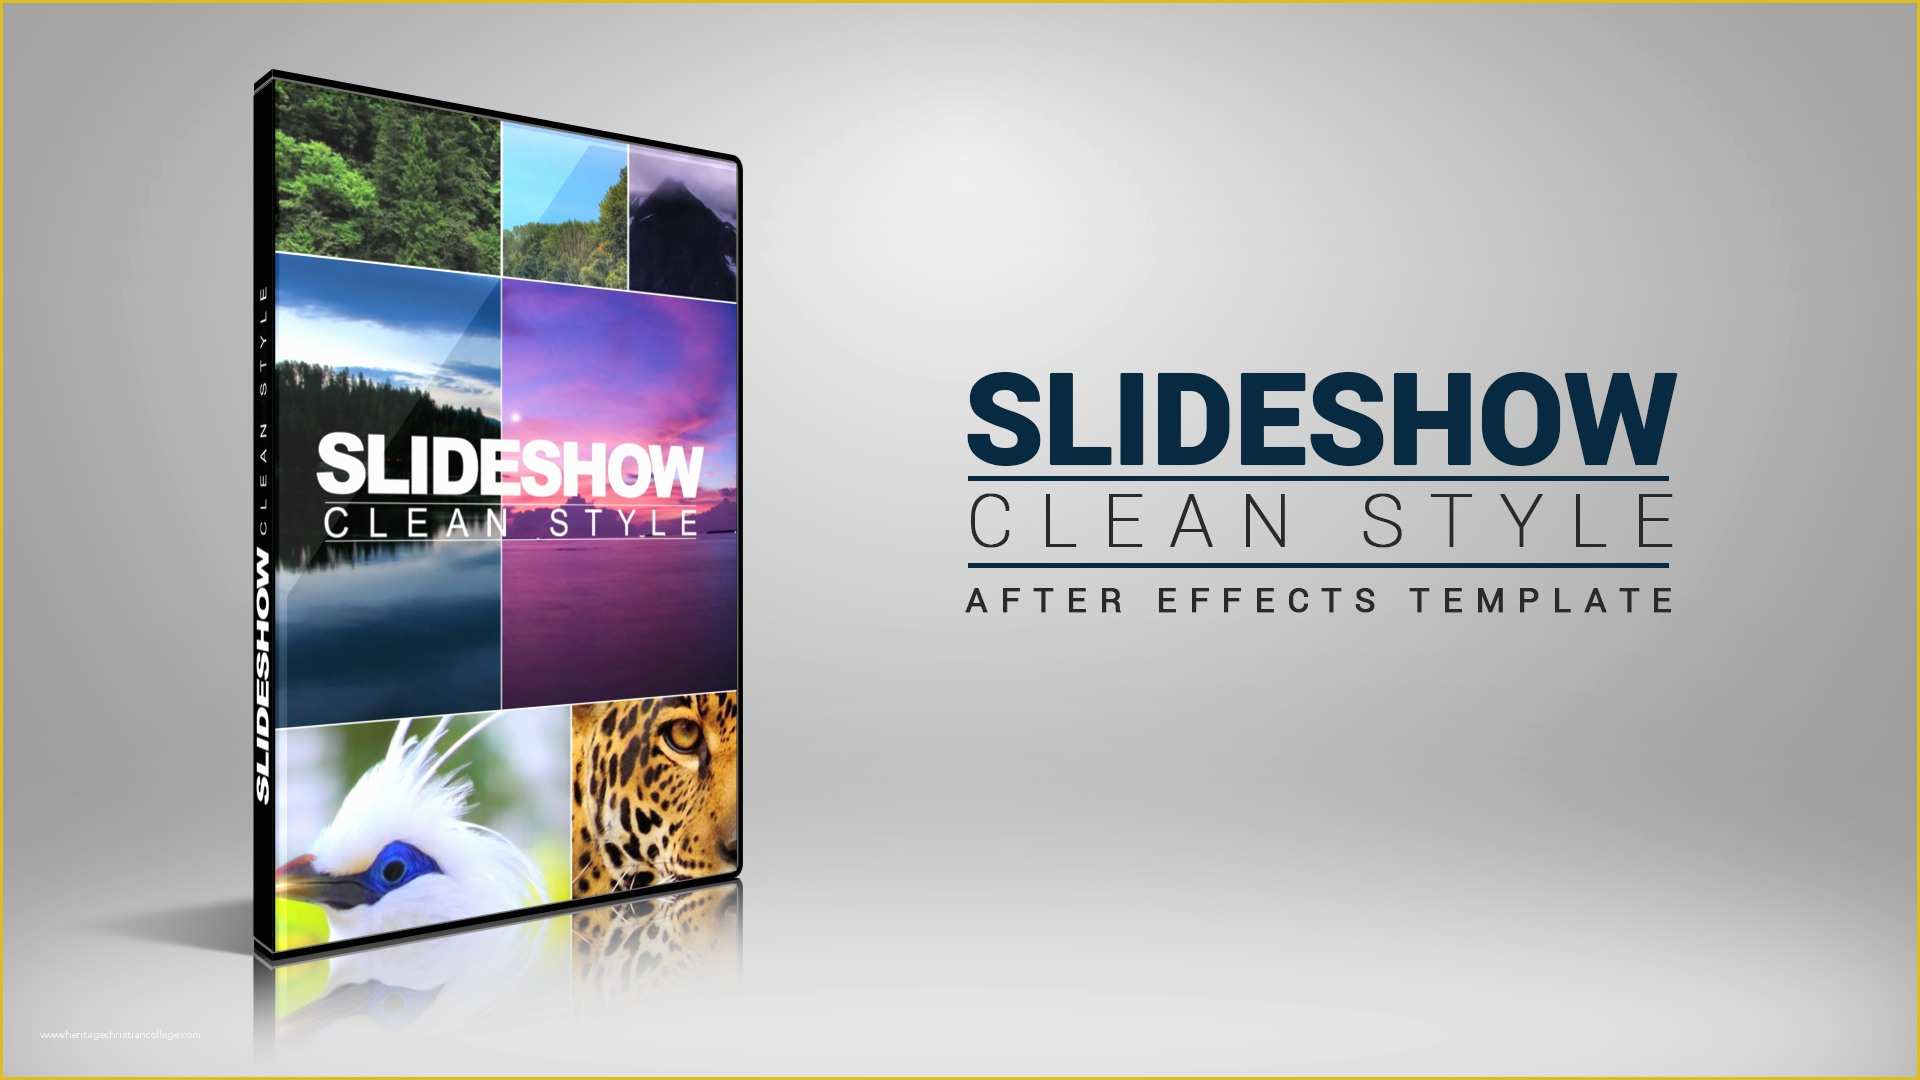 After Effects Simple Slideshow Template Free Of Slideshow Clean Style Template Bluefx